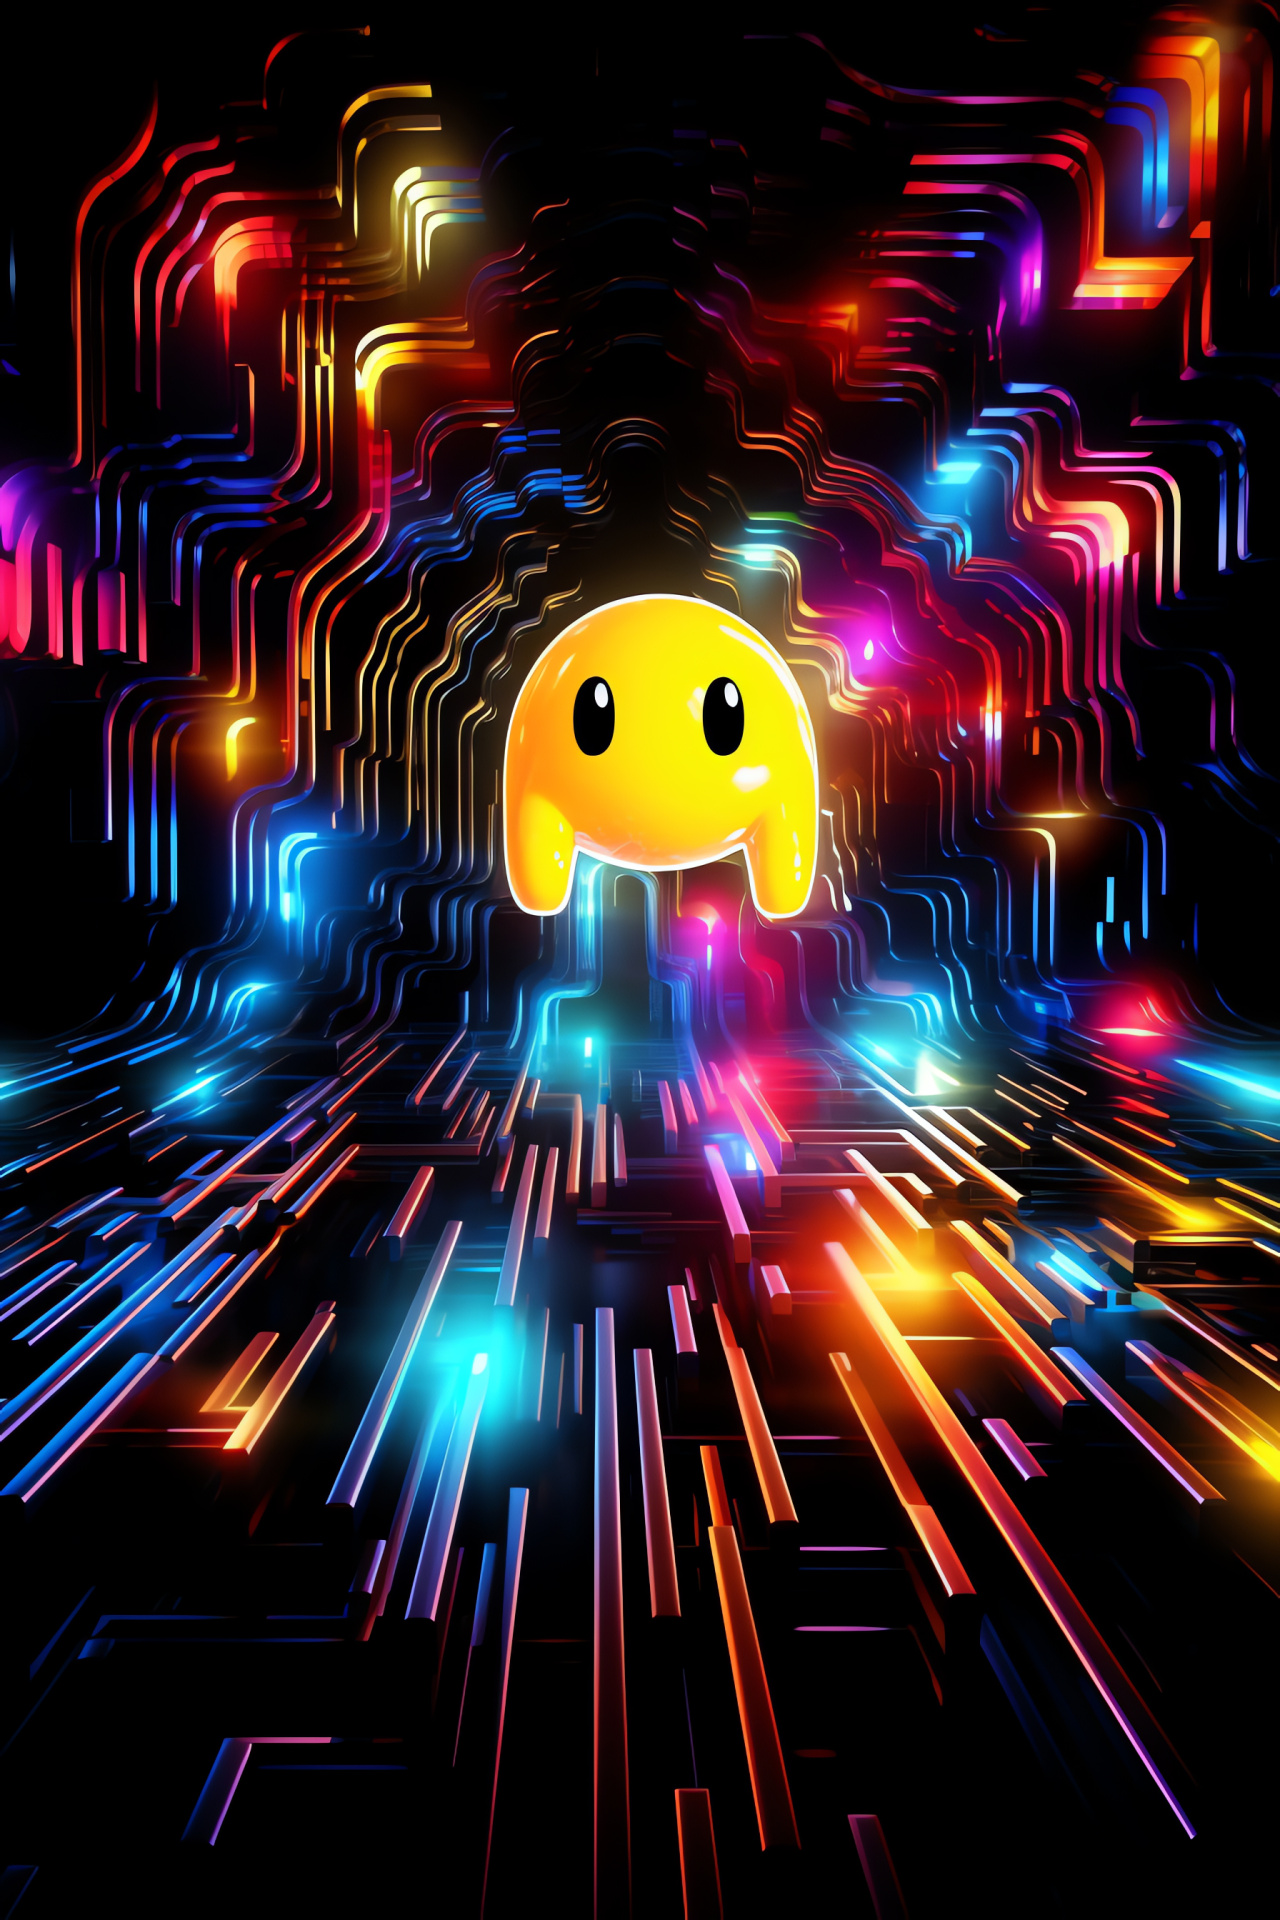 Pacman character eating pellets, Nostalgic arcade game, Classic yellow chomper, Ghost dodging, Video game icon, HD Phone Wallpaper